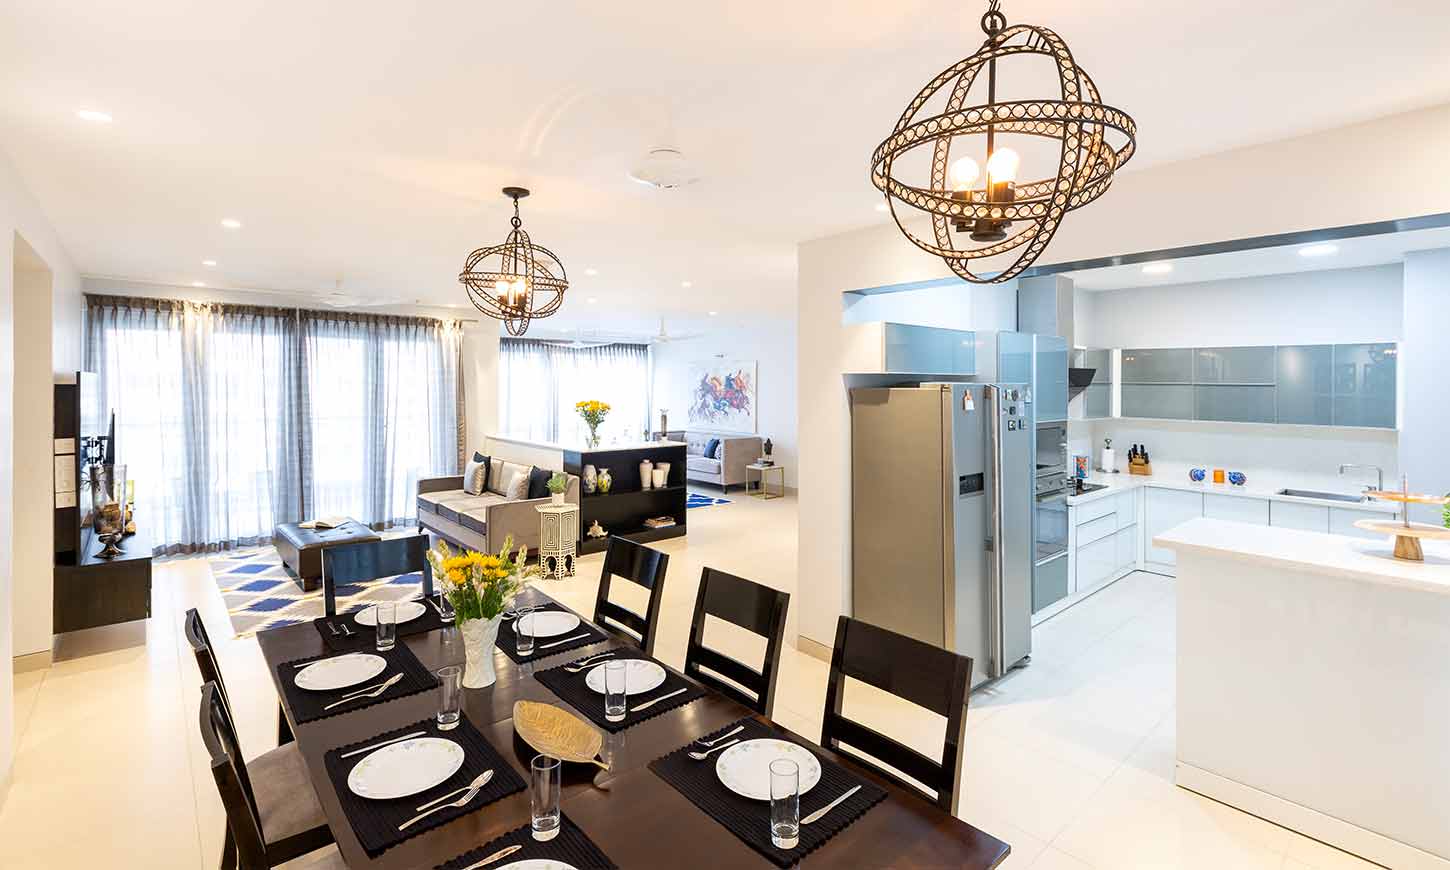 A dining area with kitchen designed by one of the best interior designing companies in bangalore